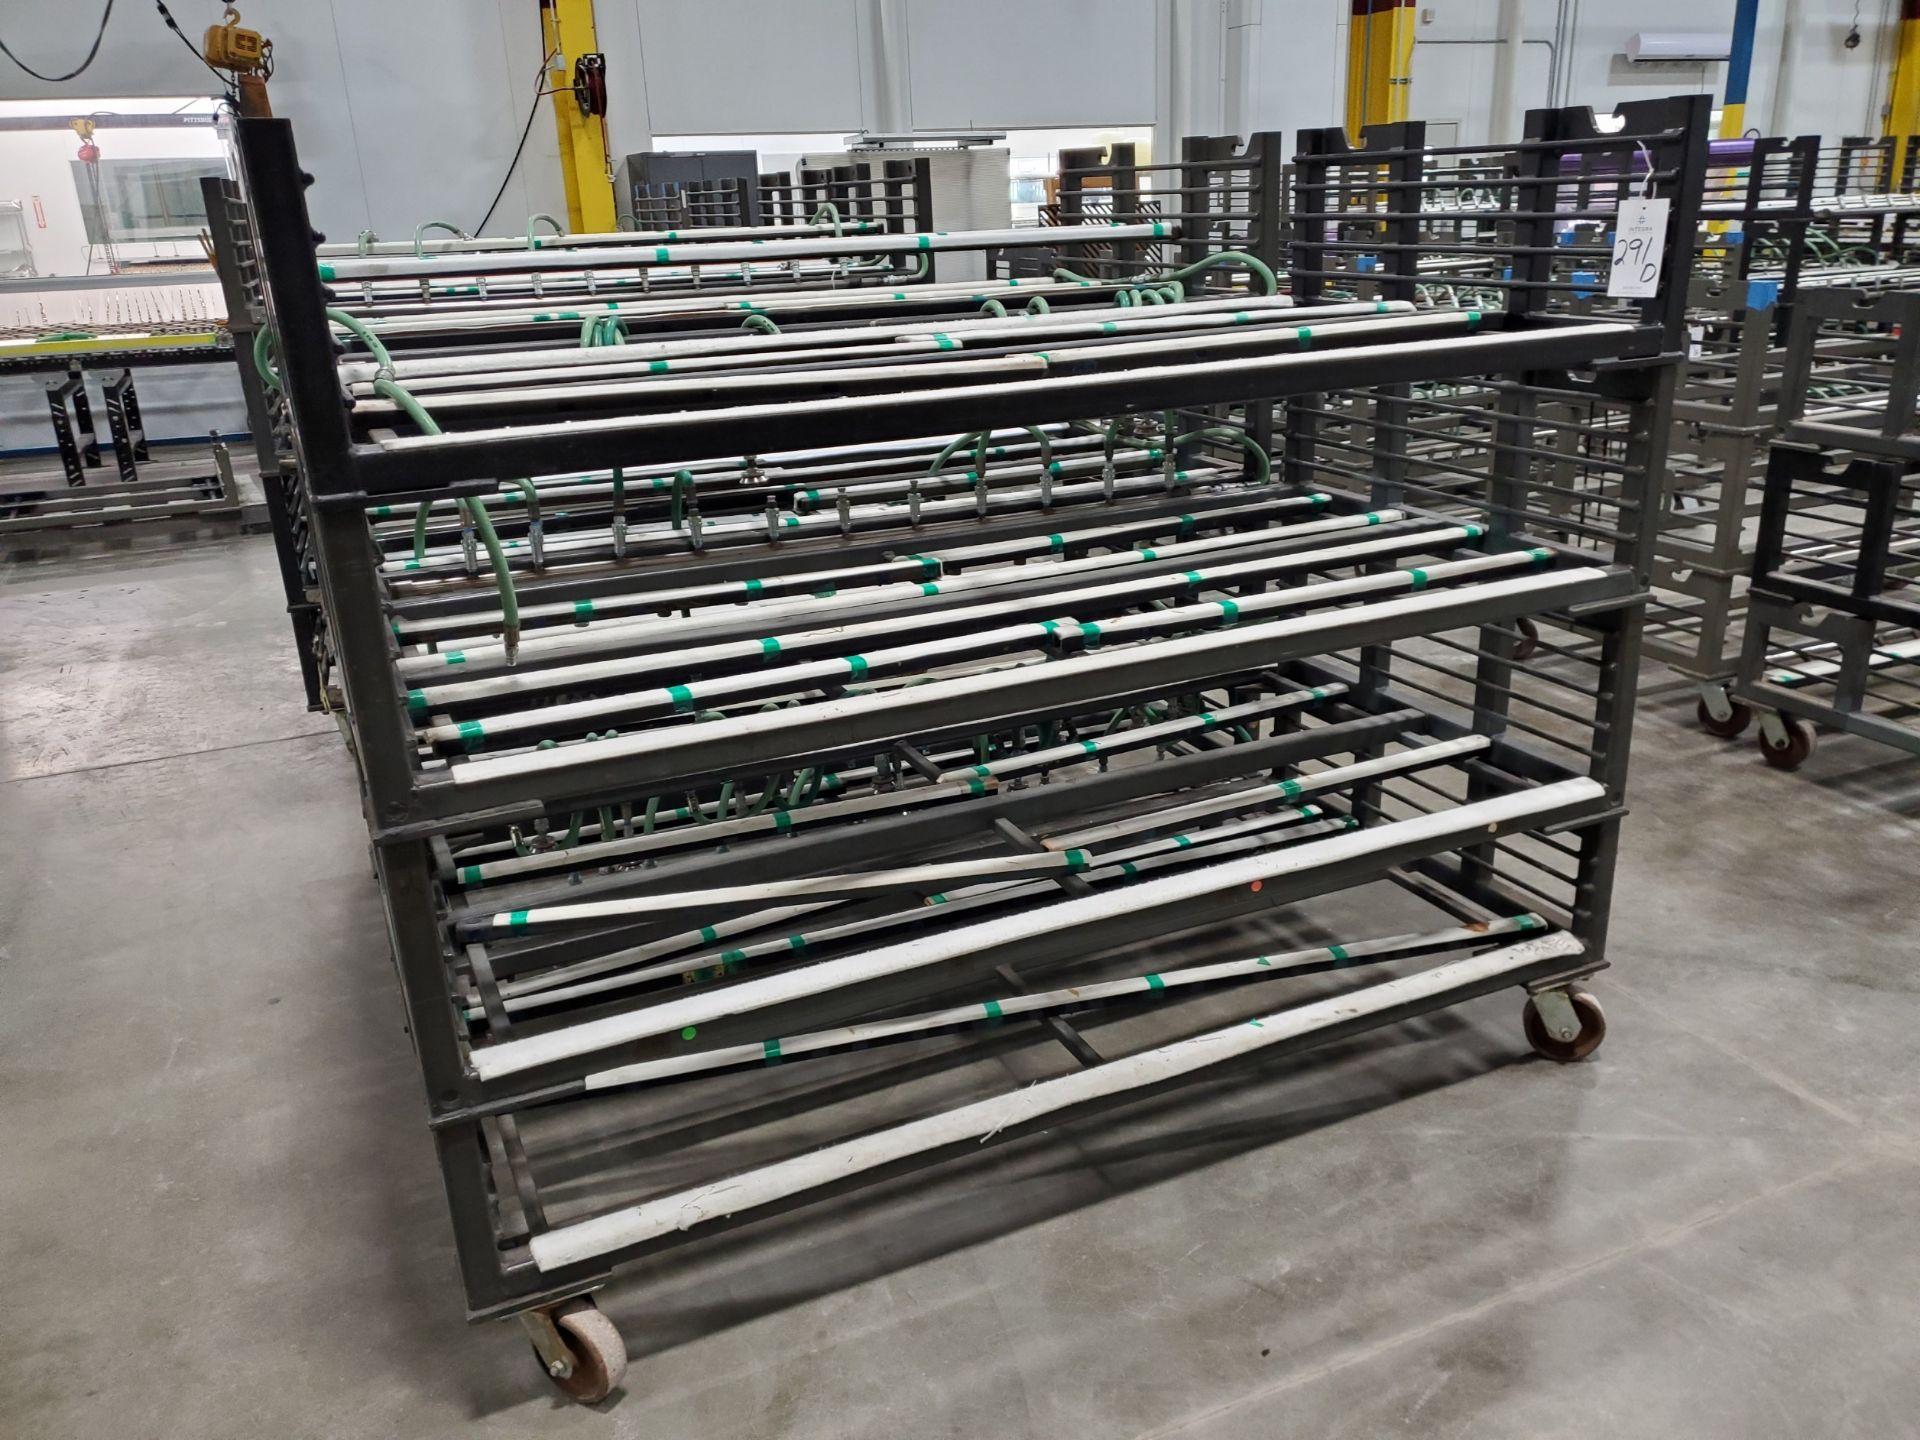 (2) 40" x 83" 4-Tier Vacuum Carts for Autoclaves